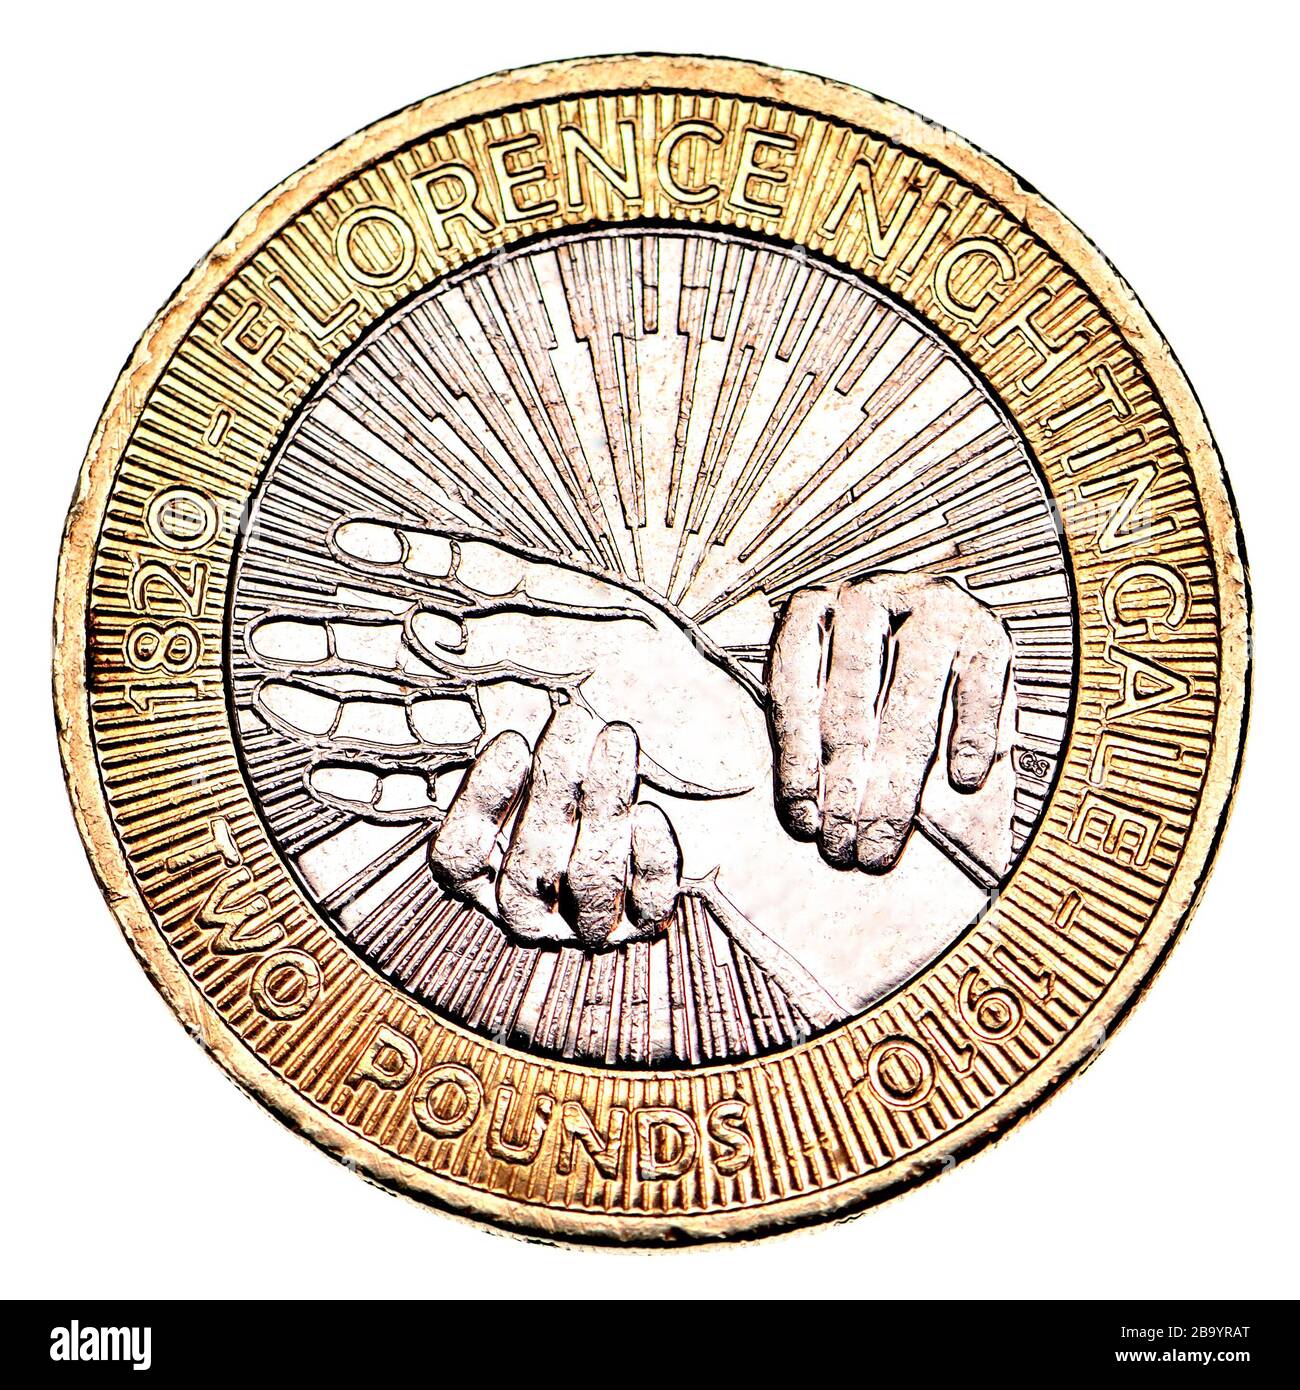 British £2 coin - 2010 - 100th Anniversary of the death of Florence Nightingale. Designed by Gordon Summers Stock Photo